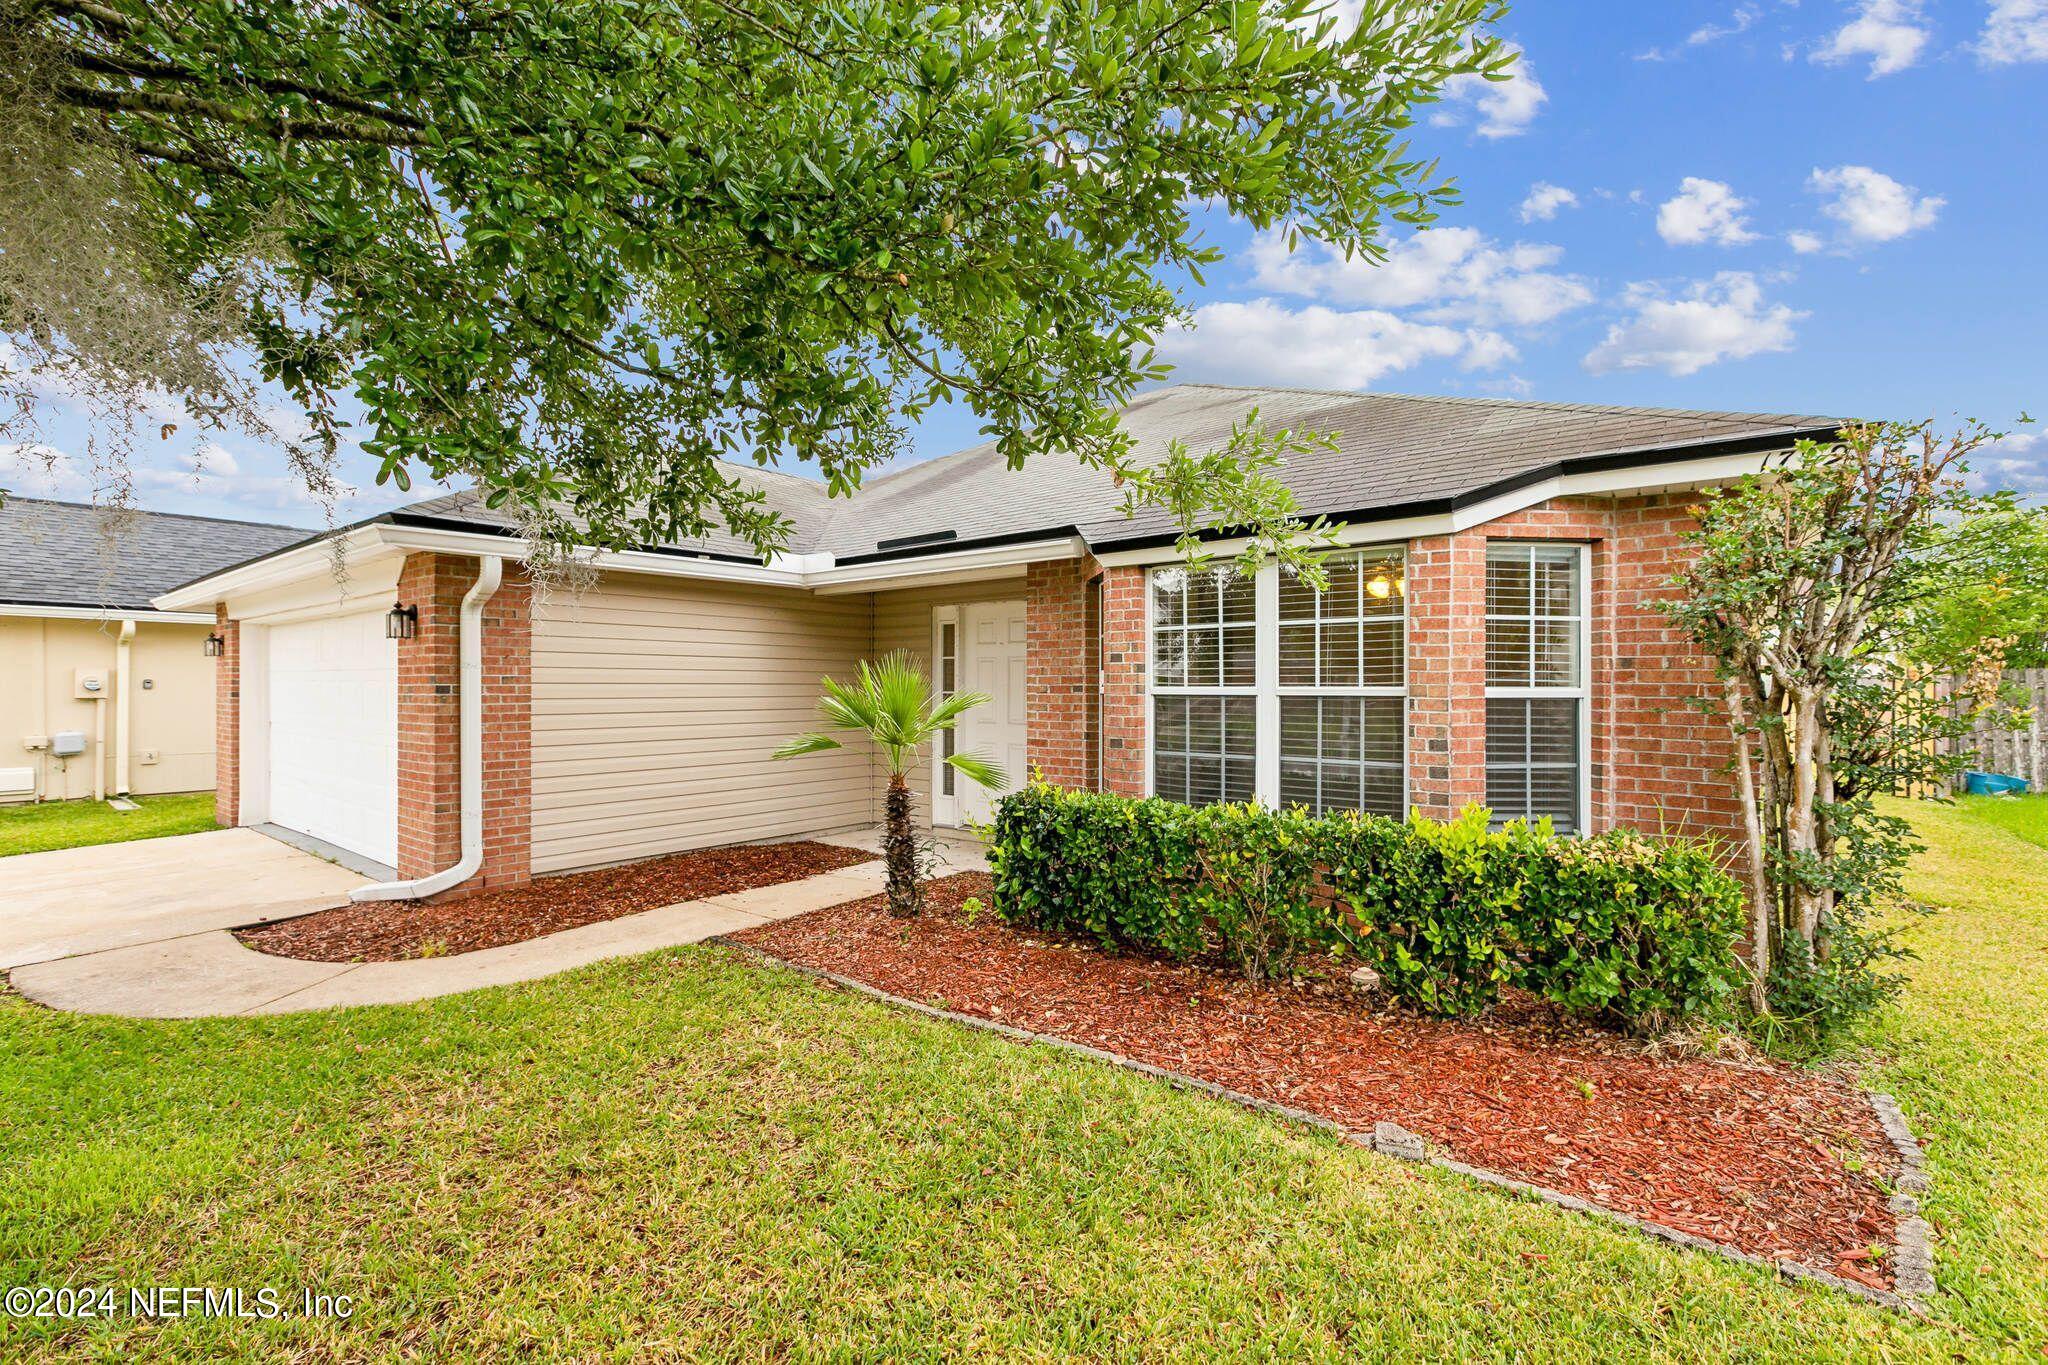 Middleburg, FL home for sale located at 1729 Saw Lake Drive, Middleburg, FL 32068